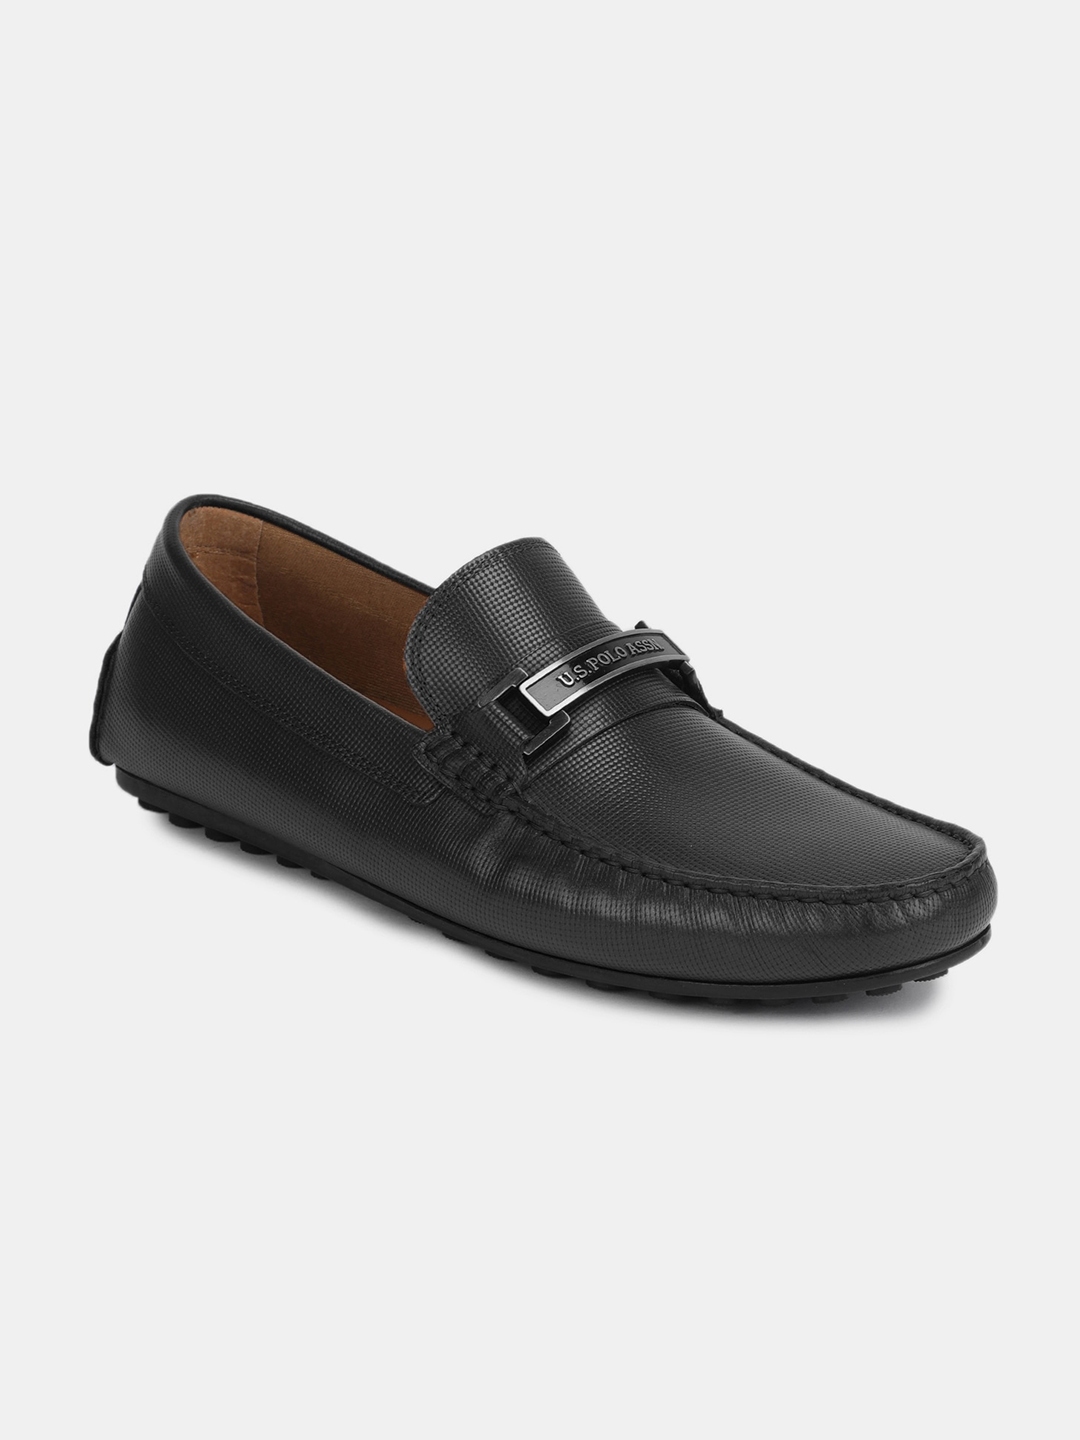 Buy U.s. Polo Assn. Men Textured Black Leather Loafers - Casual Shoes ...